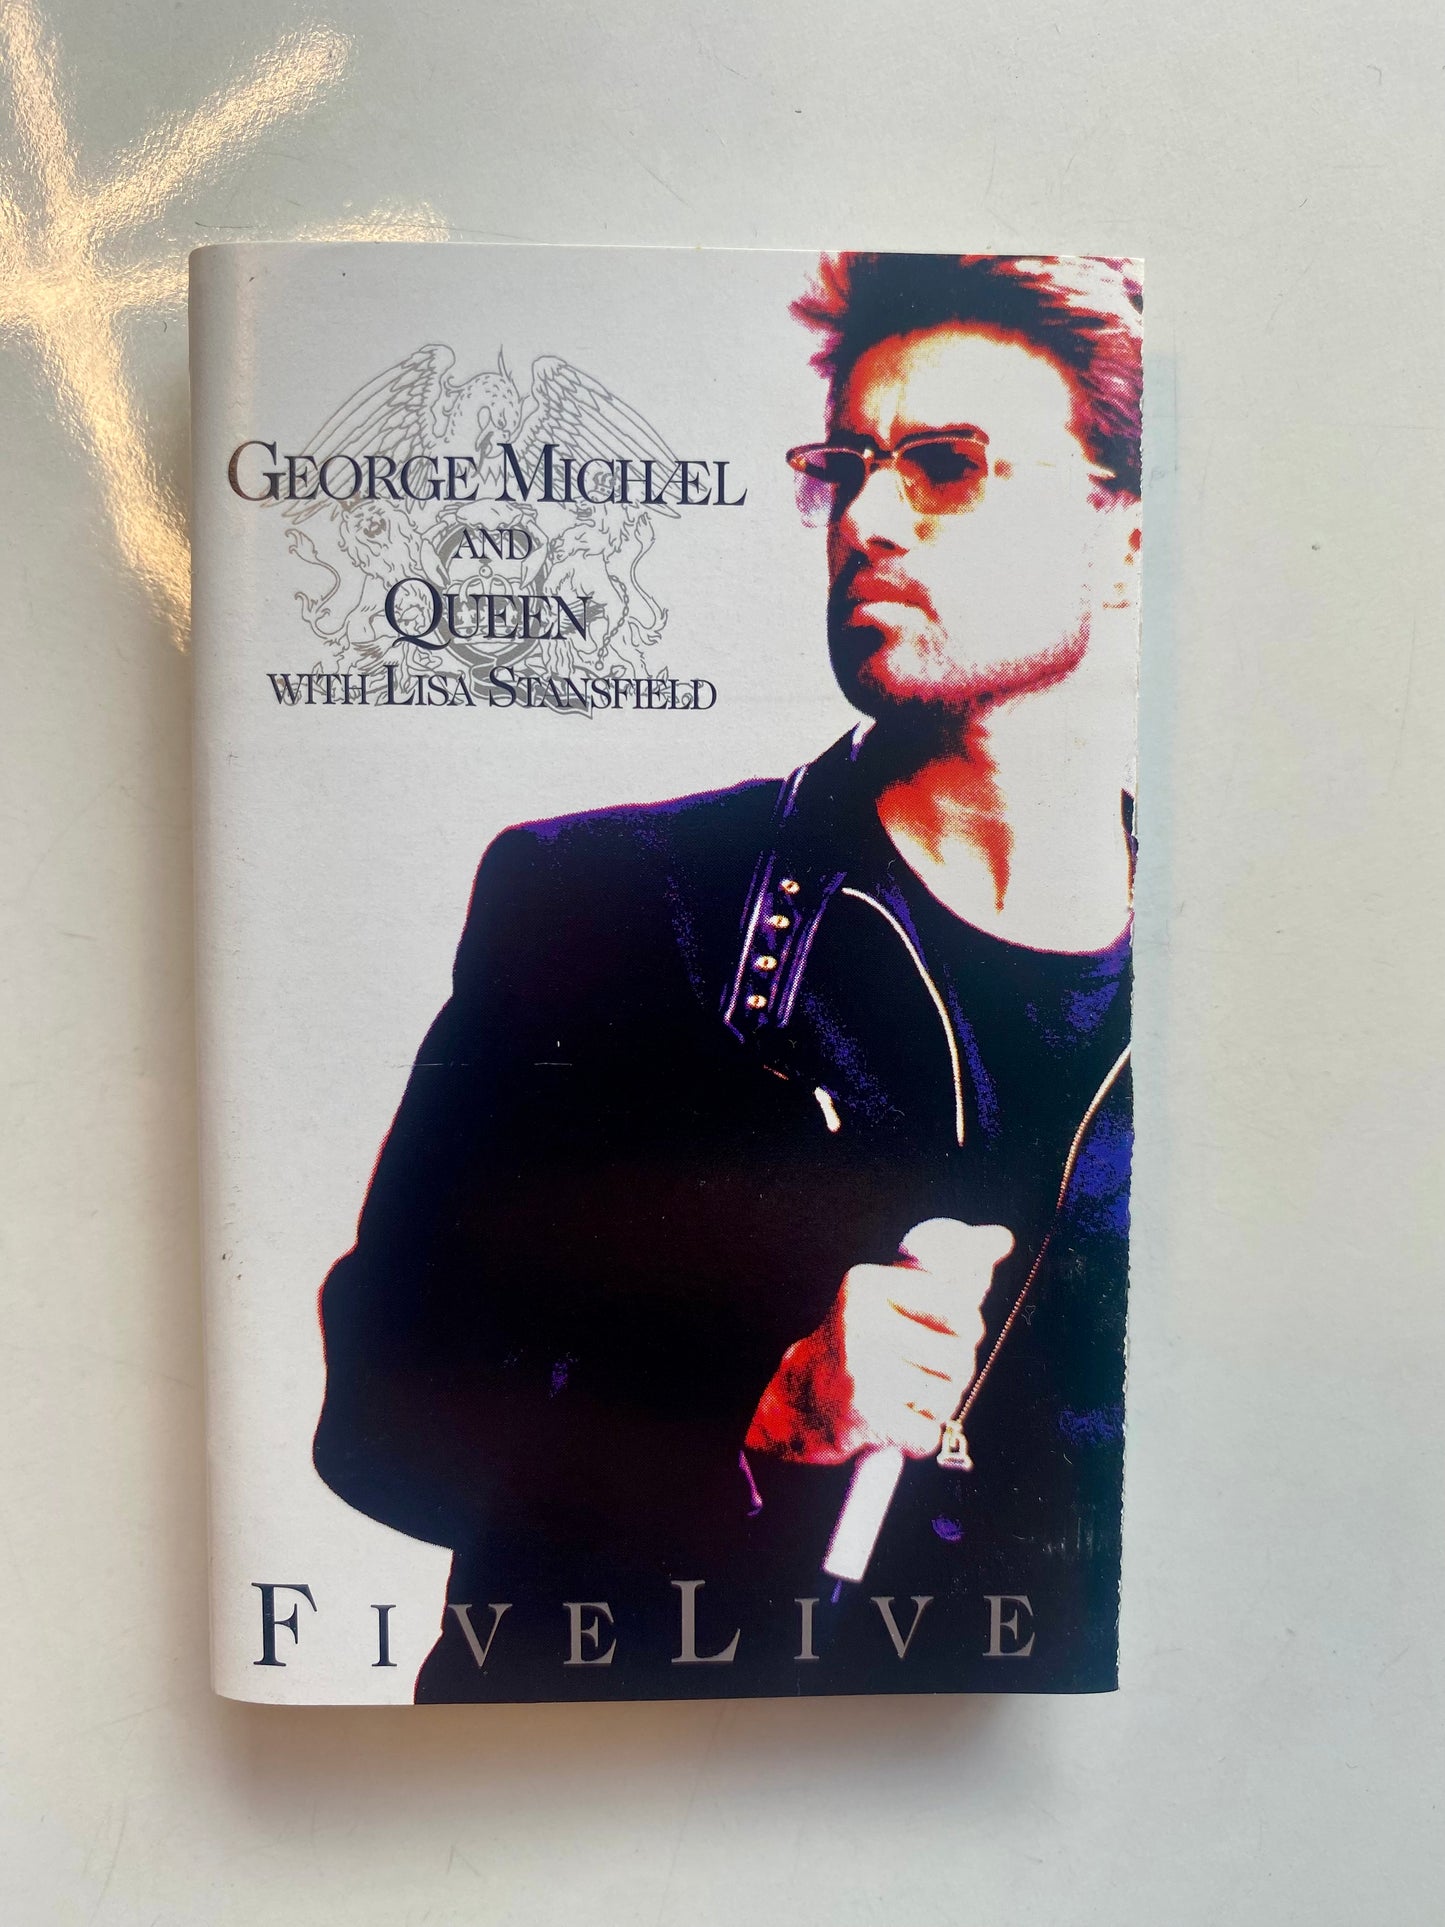 George Michael and Queen, Five Live